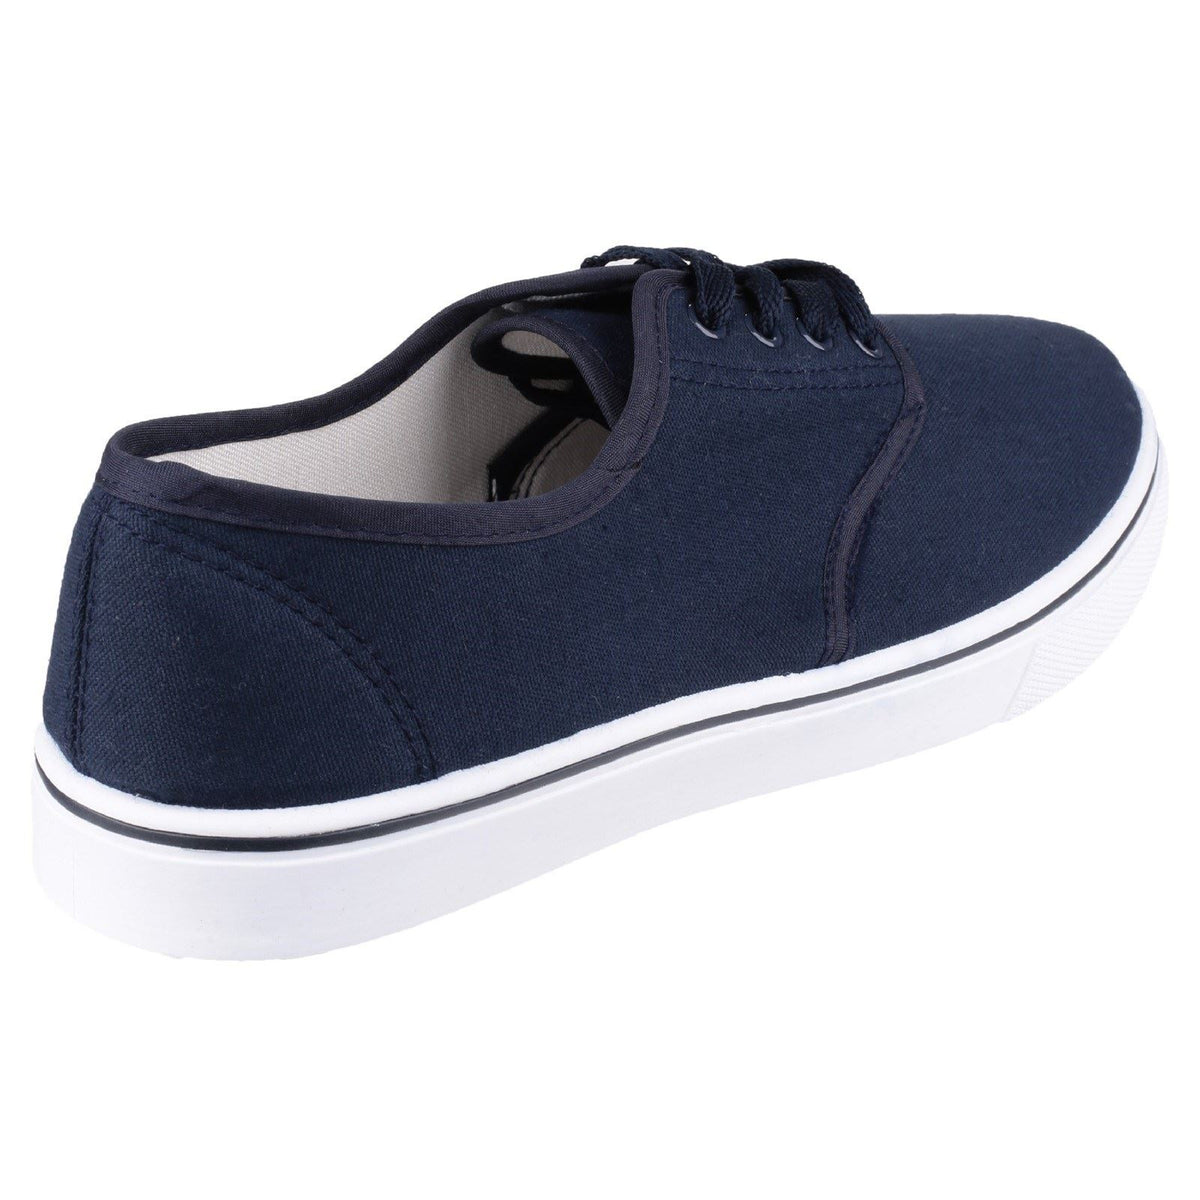 Yachtmaster Lace Up Shoes